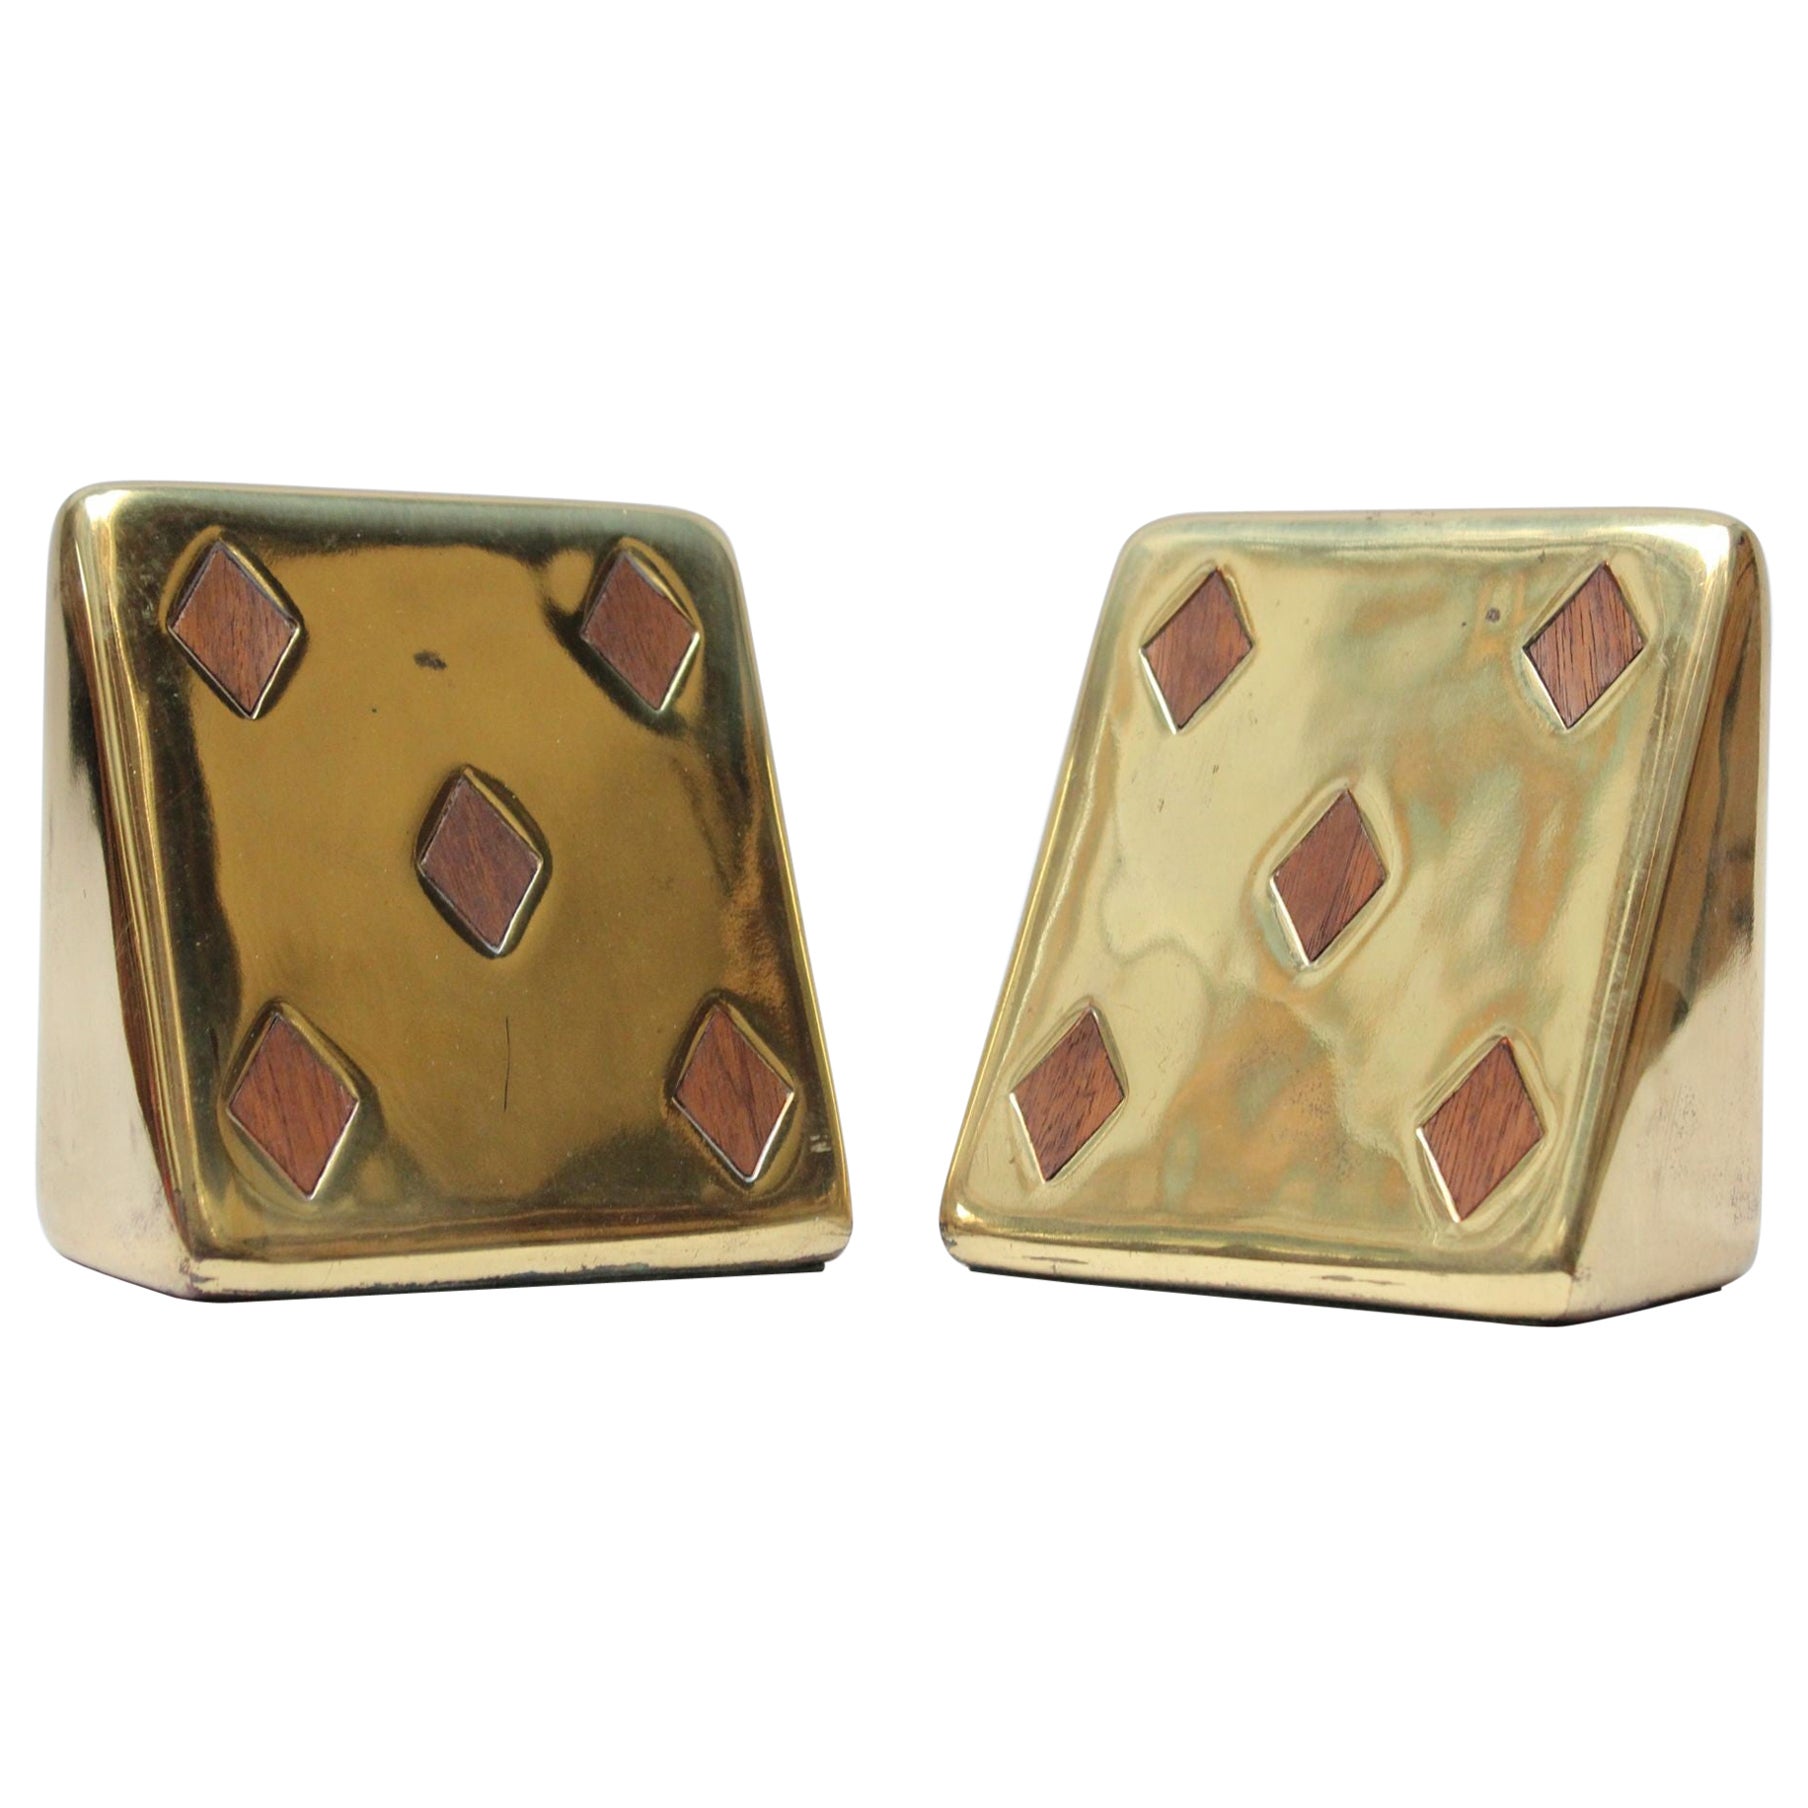 Ben Seibel for Jenfred Ware Bookends in Brass and Walnut "Diamond"